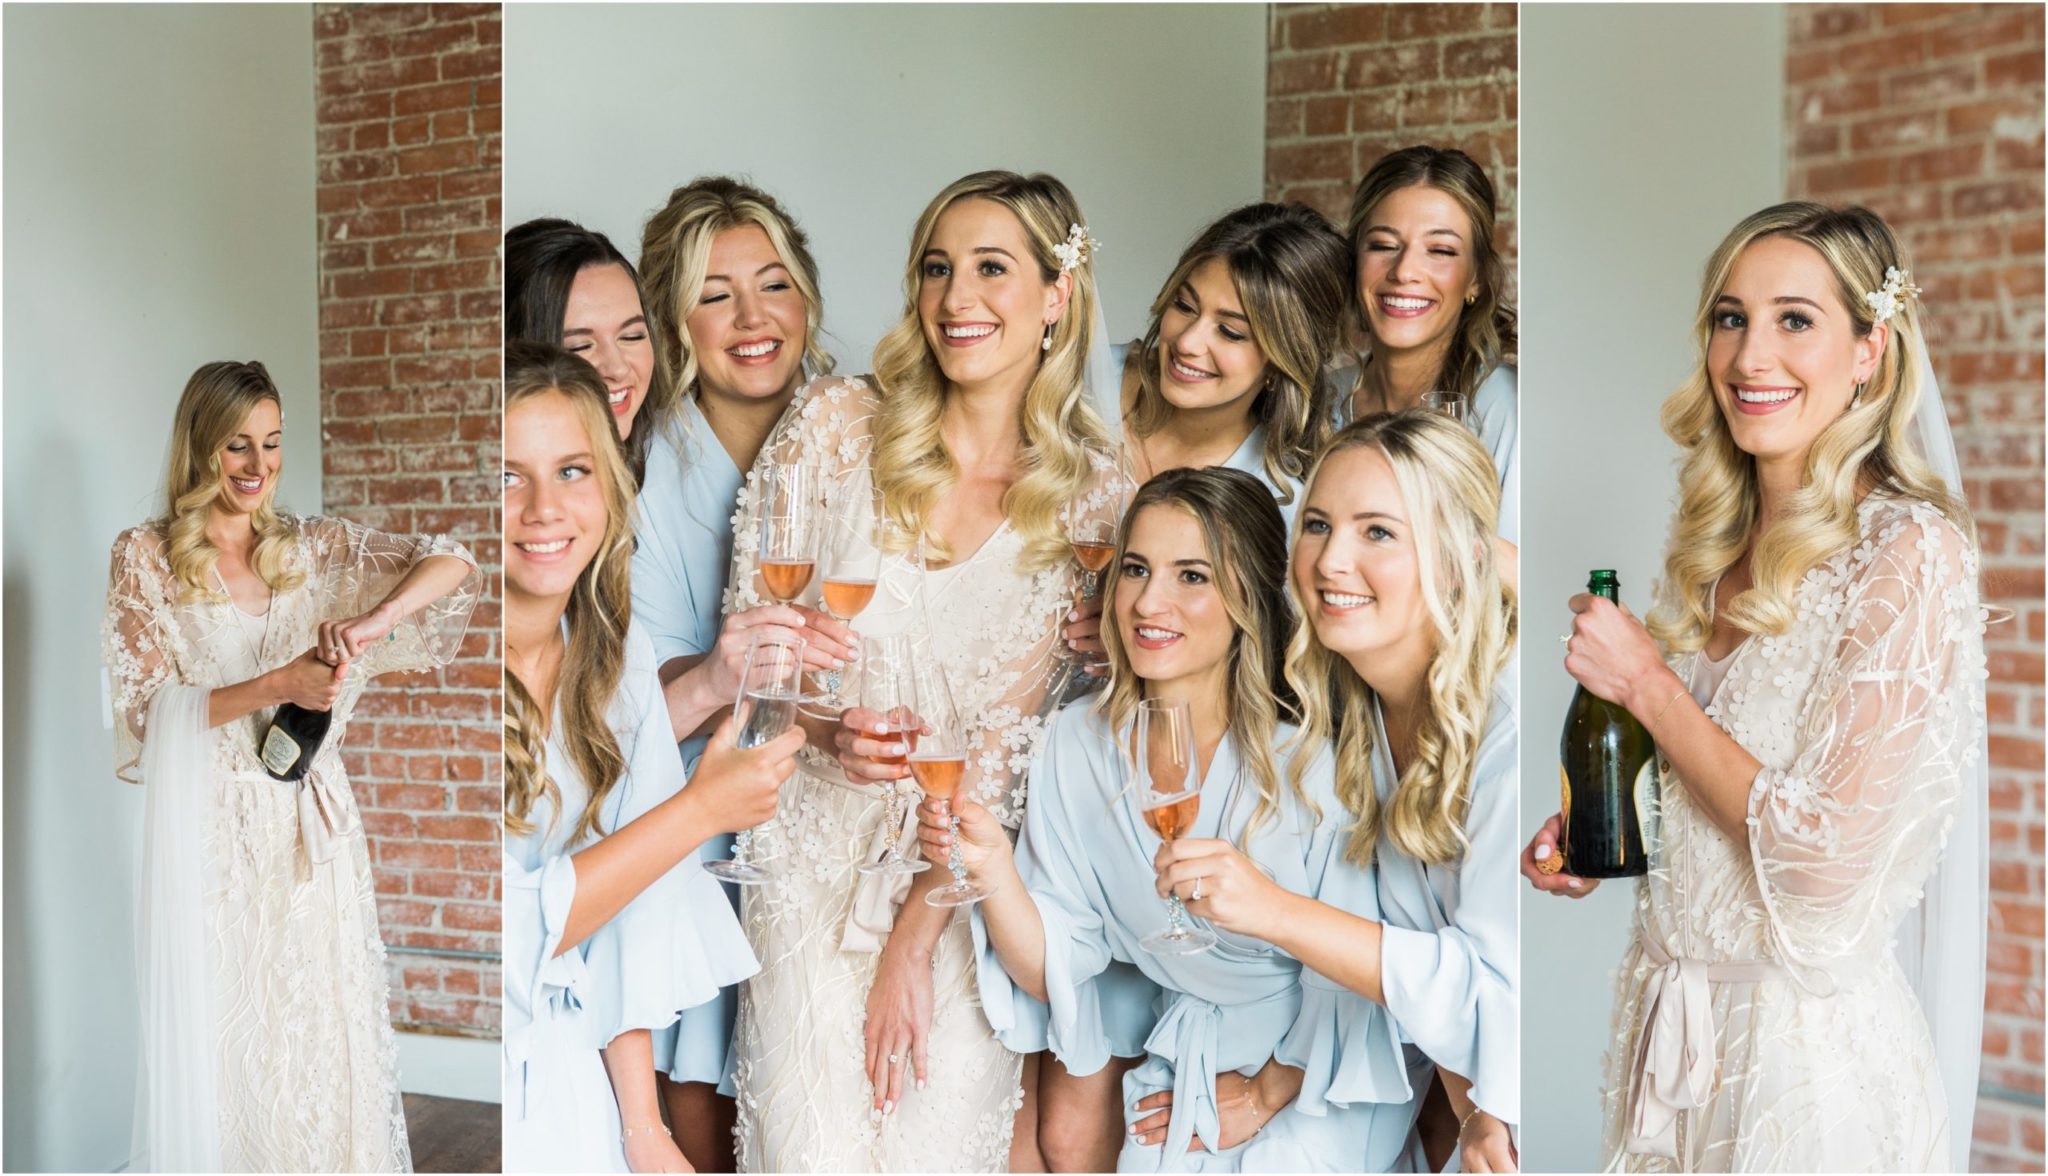 a collaged image of a bride popping champagne with her bridesmaids on wedding day